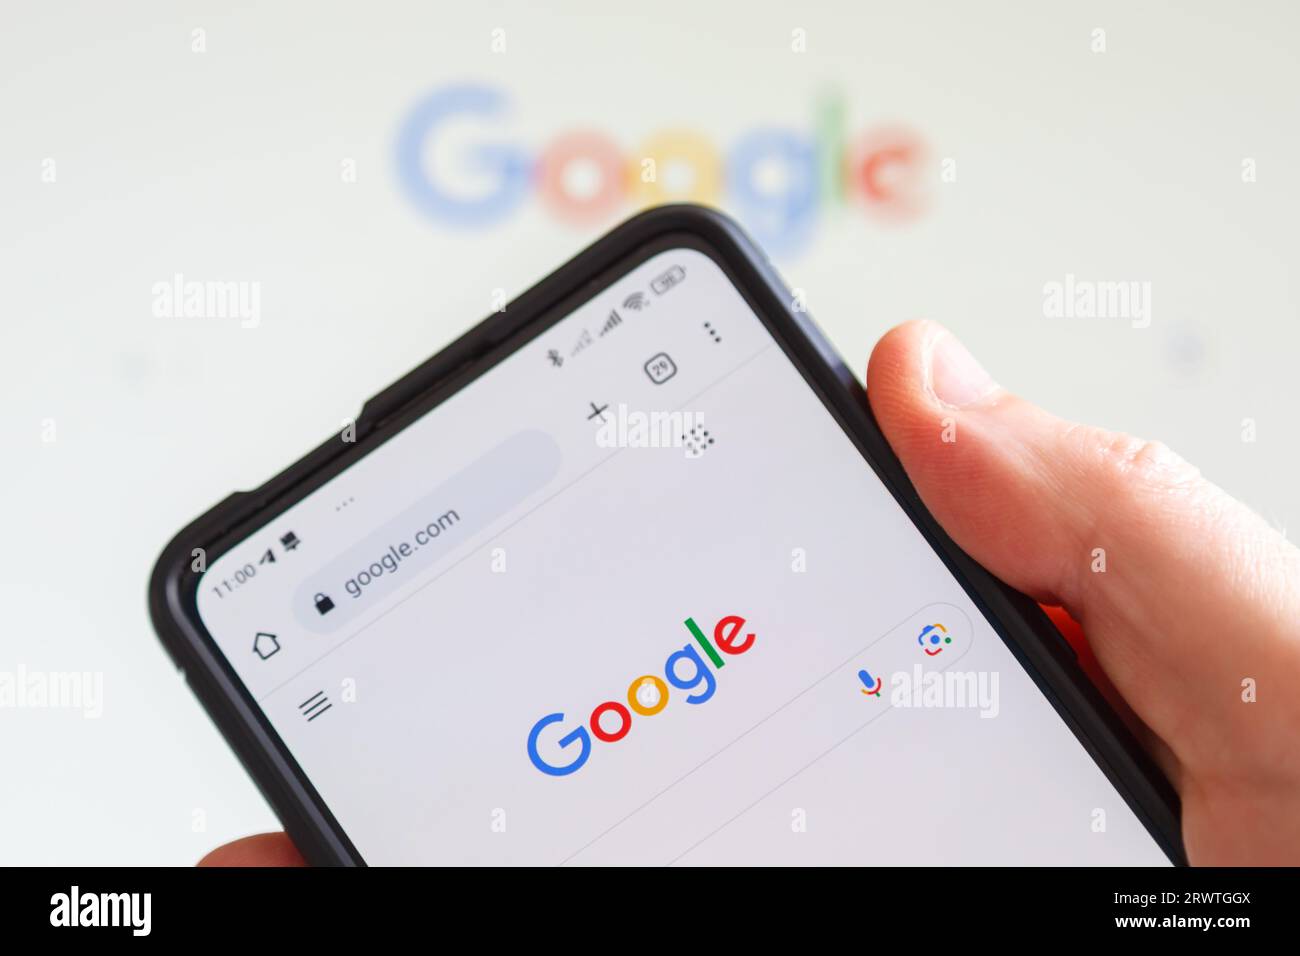 Stuttgart, Germany - July 23, 2023: Hand holding a mobile phone with Google logo of the computer hardware software manufacturer screen in Stuttgart, G Stock Photo